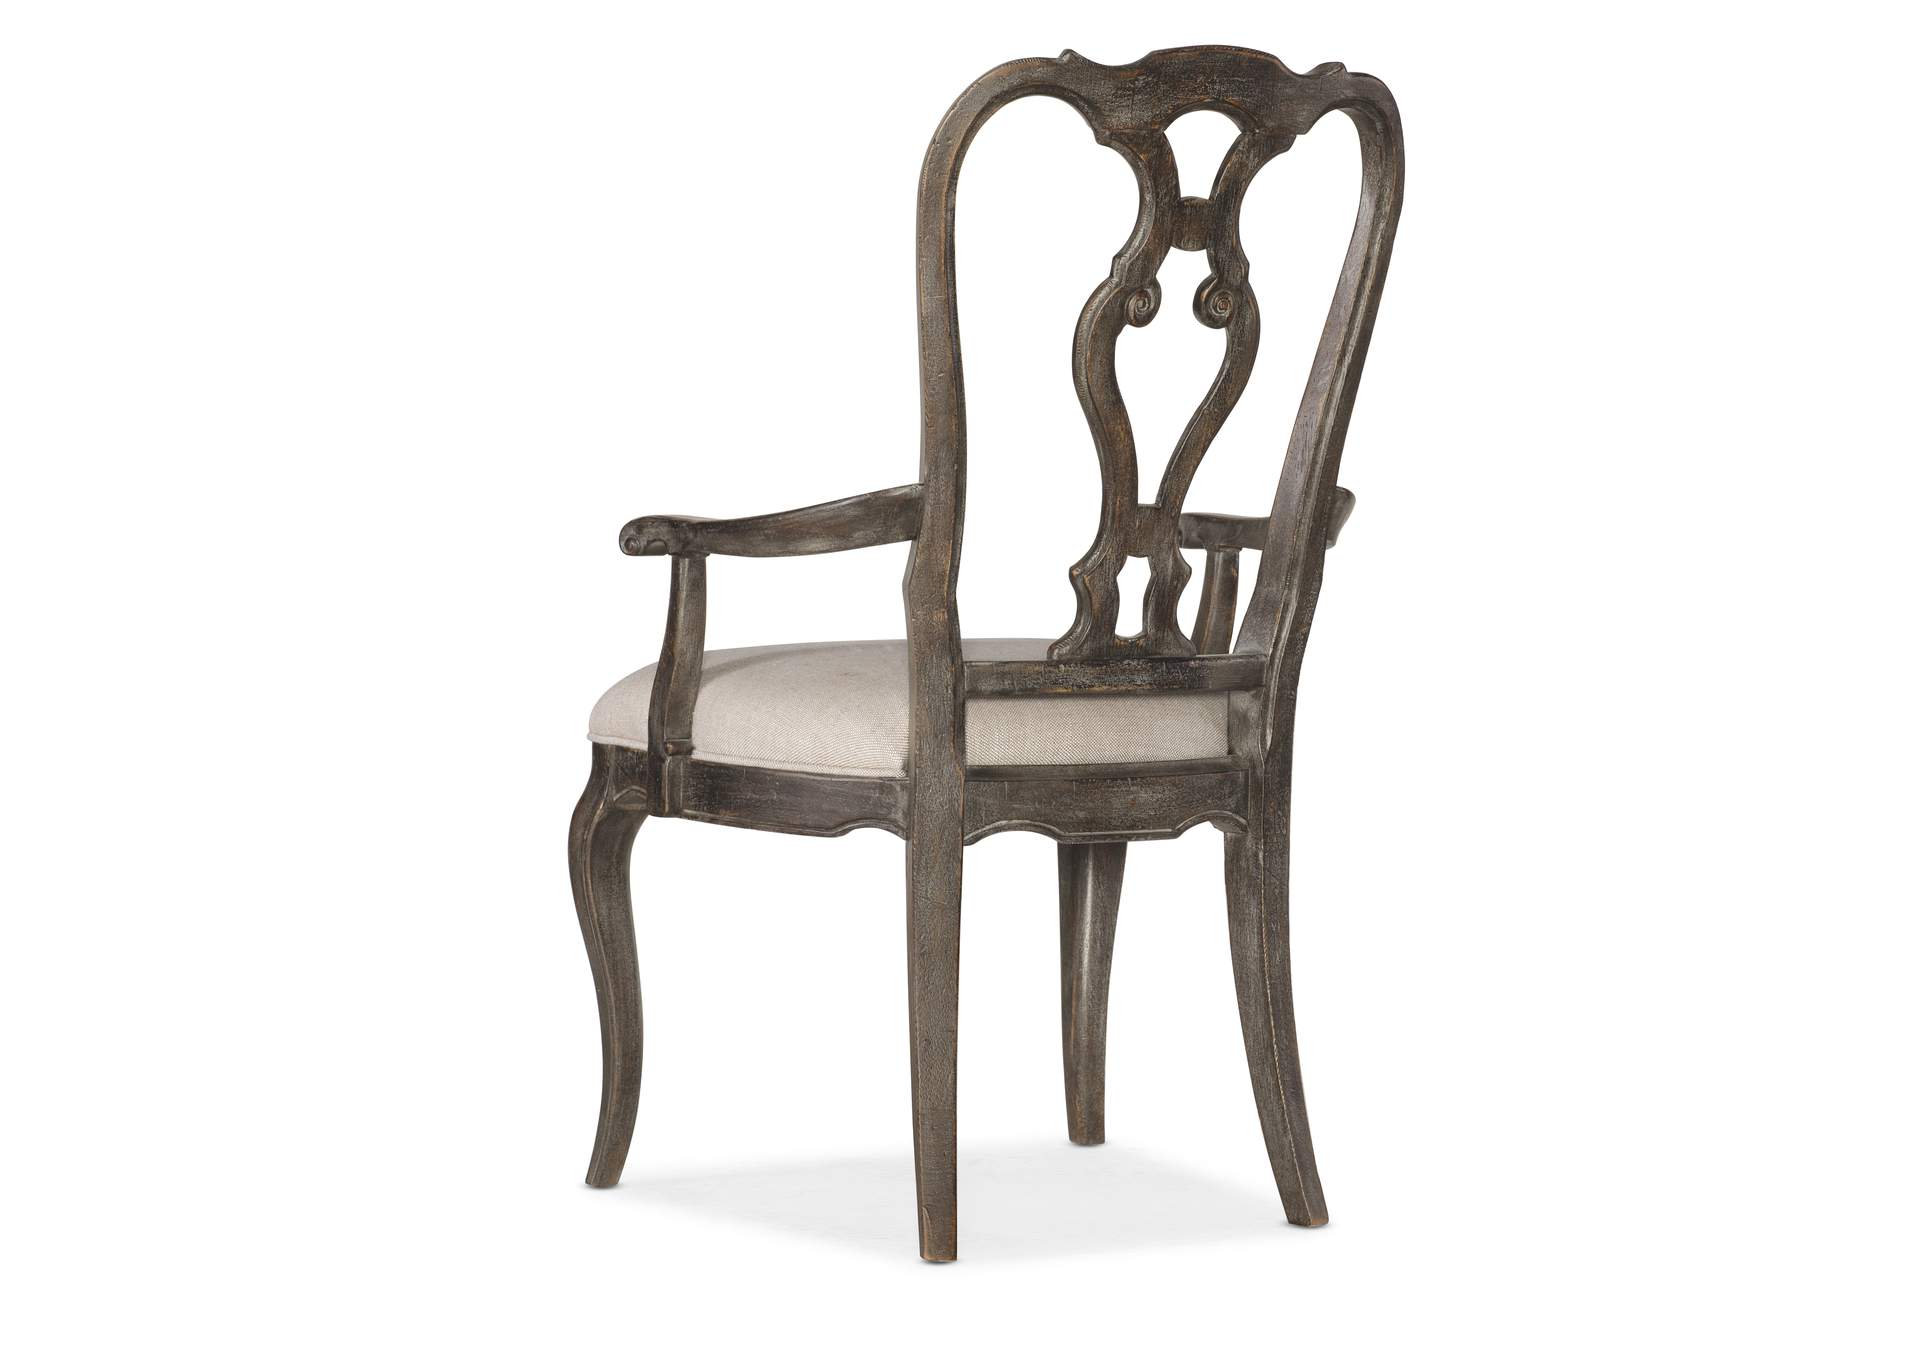 Traditions Wood Back Arm Chair 2 Per Carton - Price Ea,Hooker Furniture